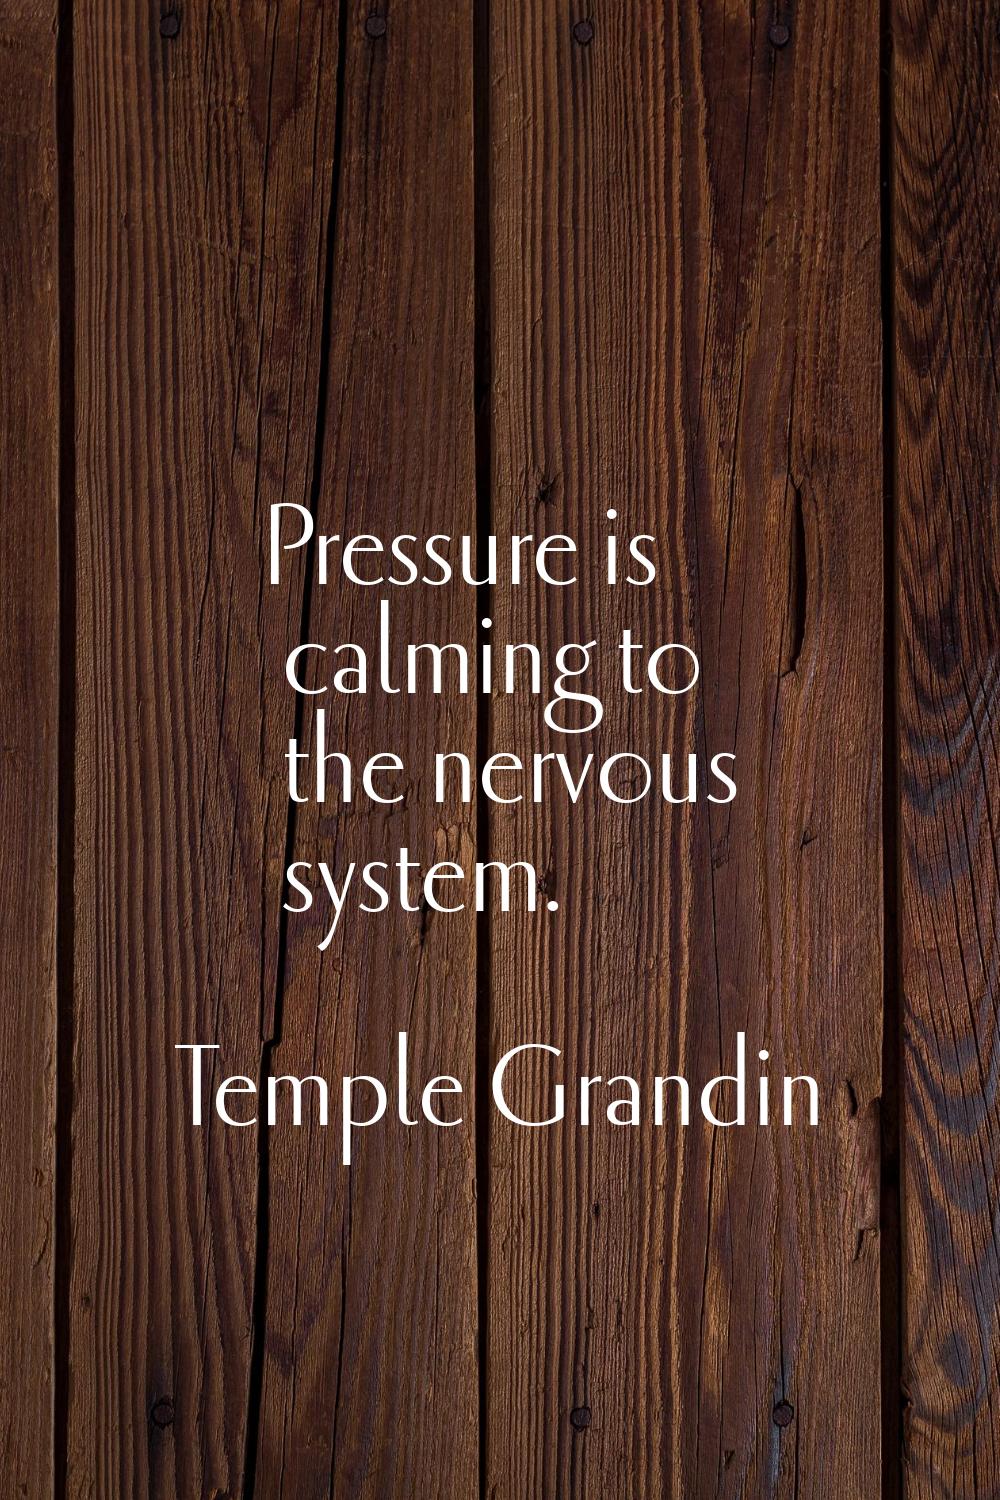 Pressure is calming to the nervous system.